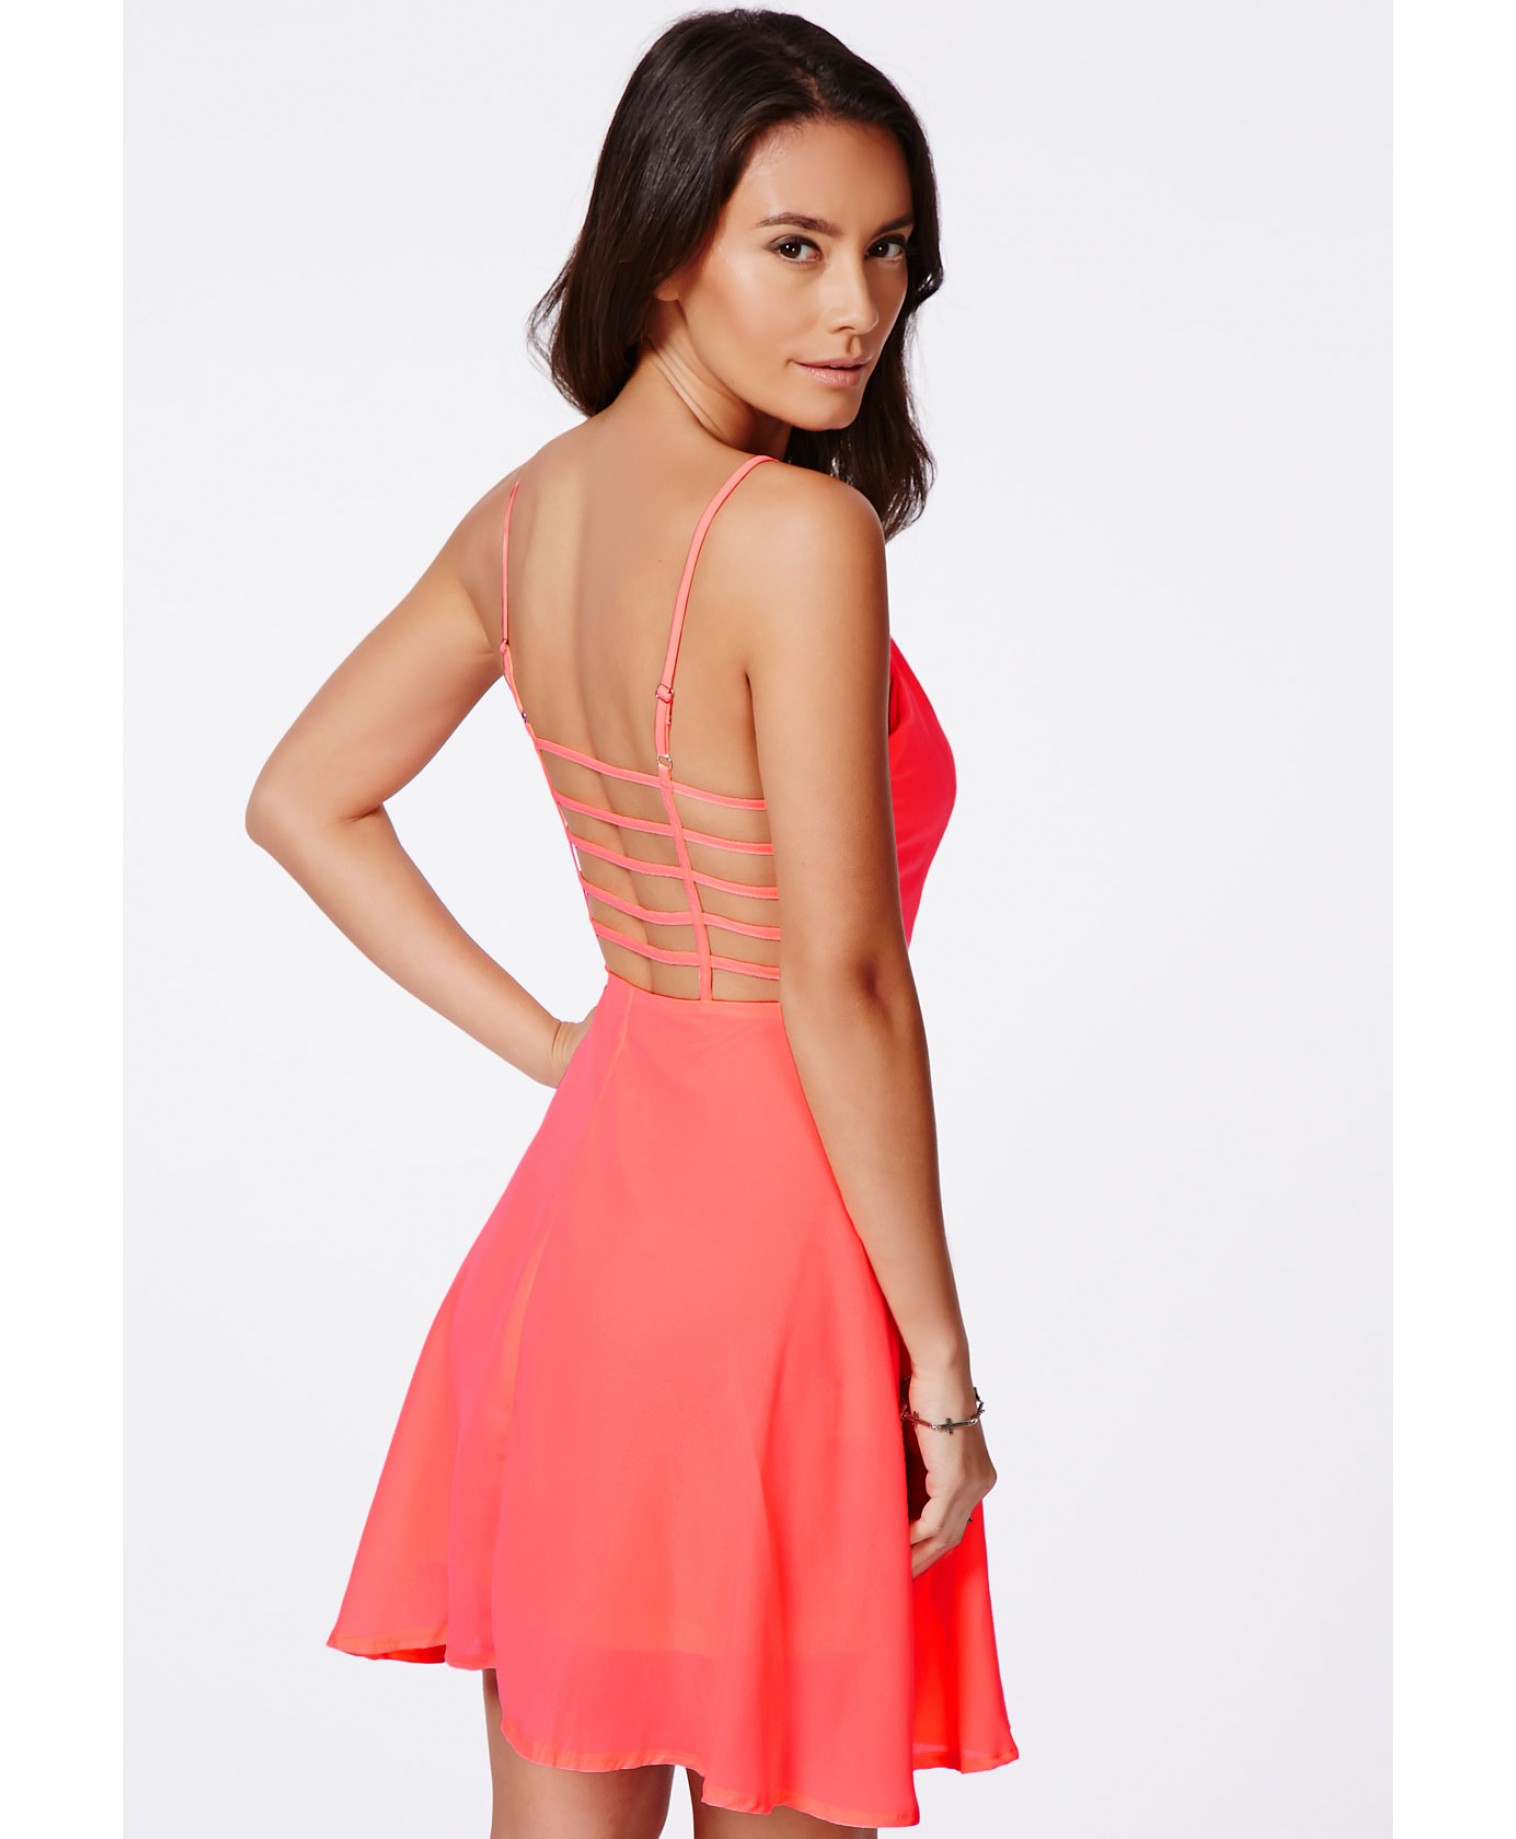 Lyst - Missguided Paula Neon Coral Chiffon Caged Back Skater Dress in Pink